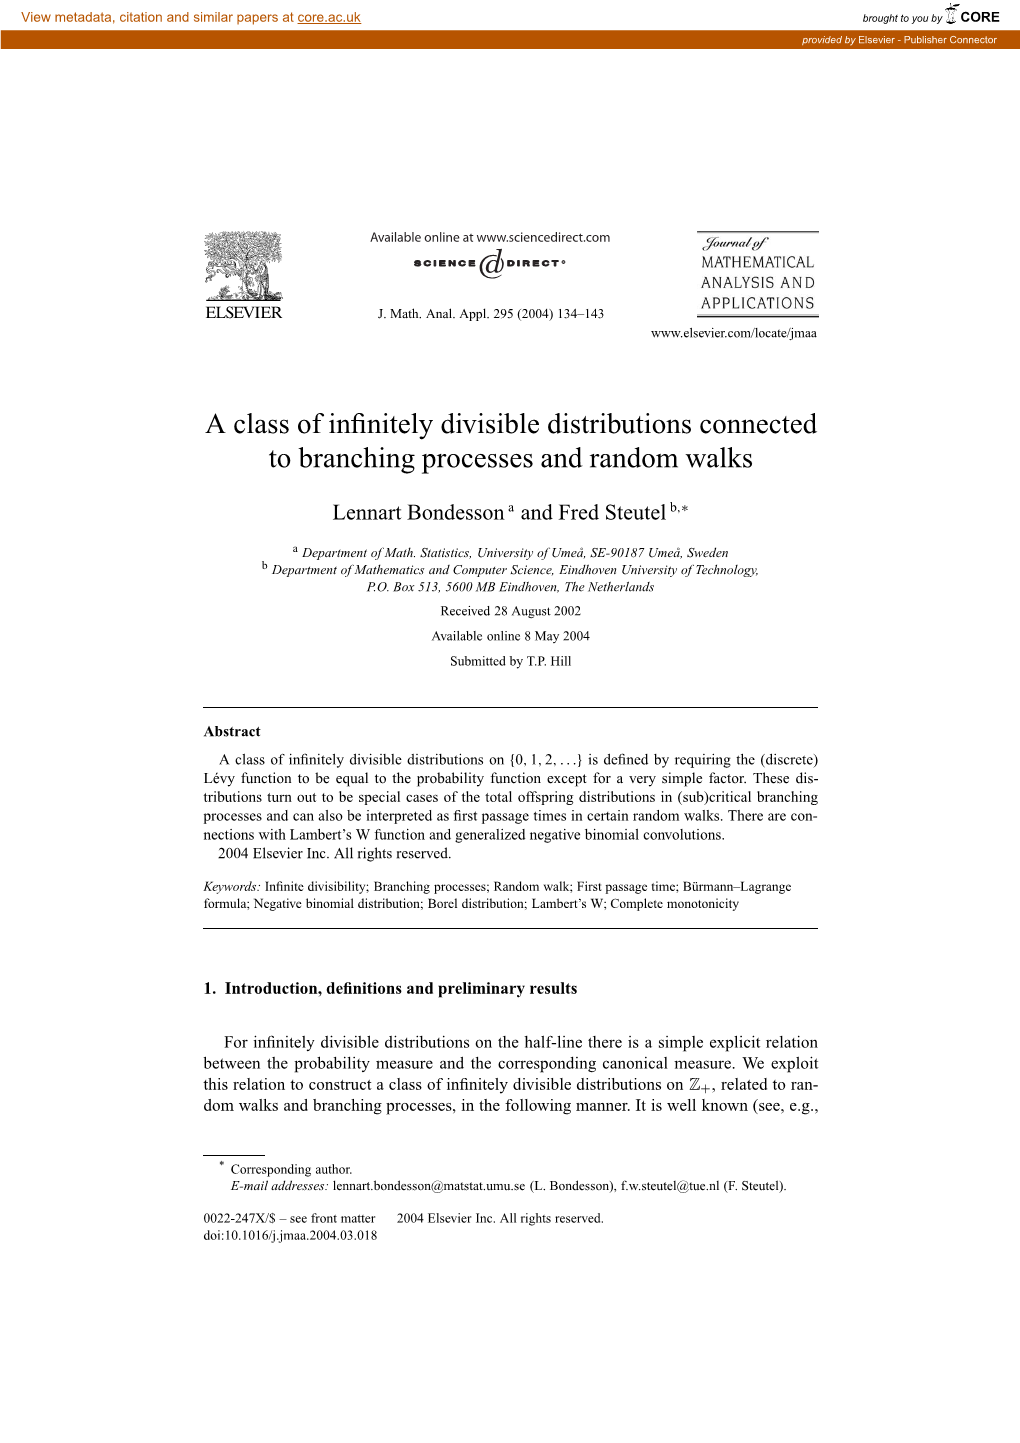 A Class of Infinitely Divisible Distributions Connected To